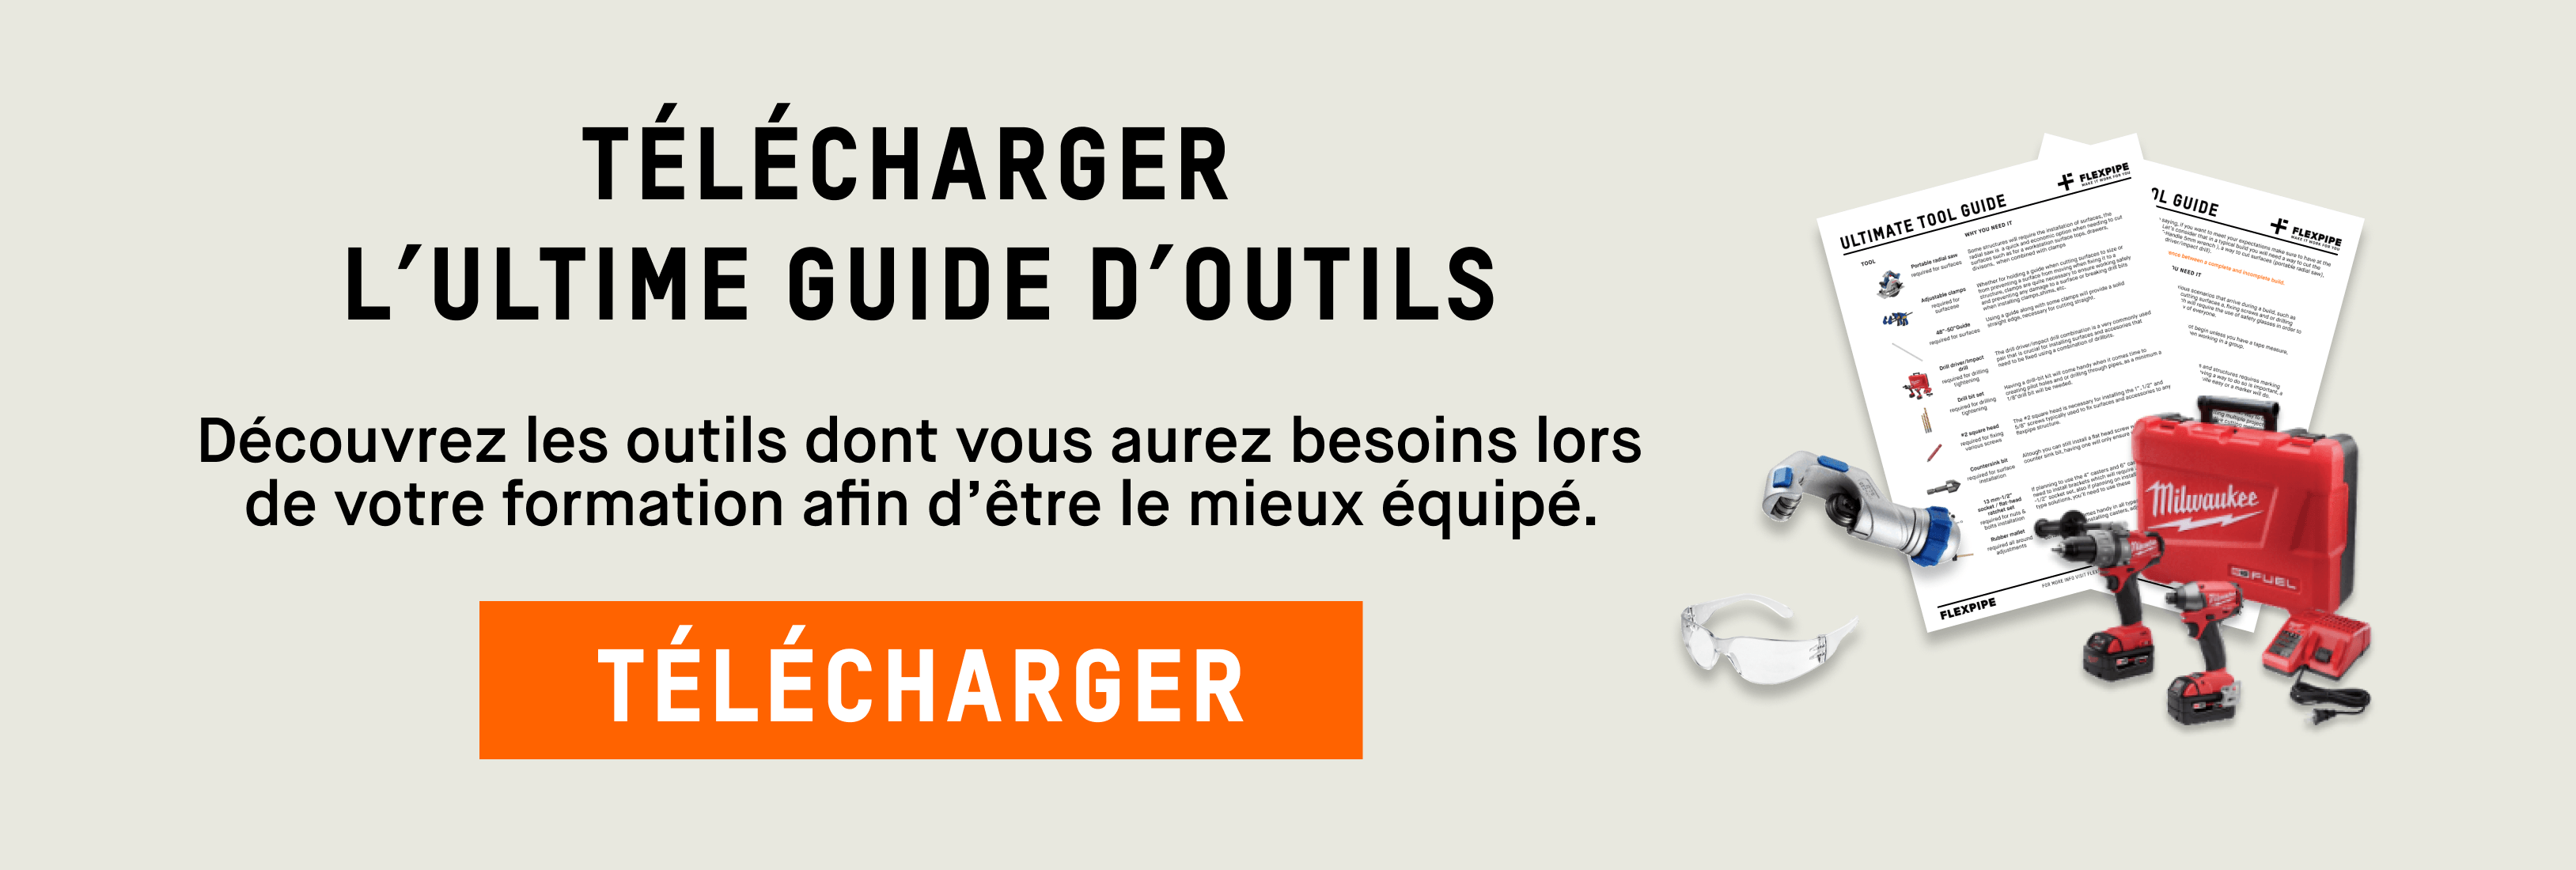 Ultime guide d'outils